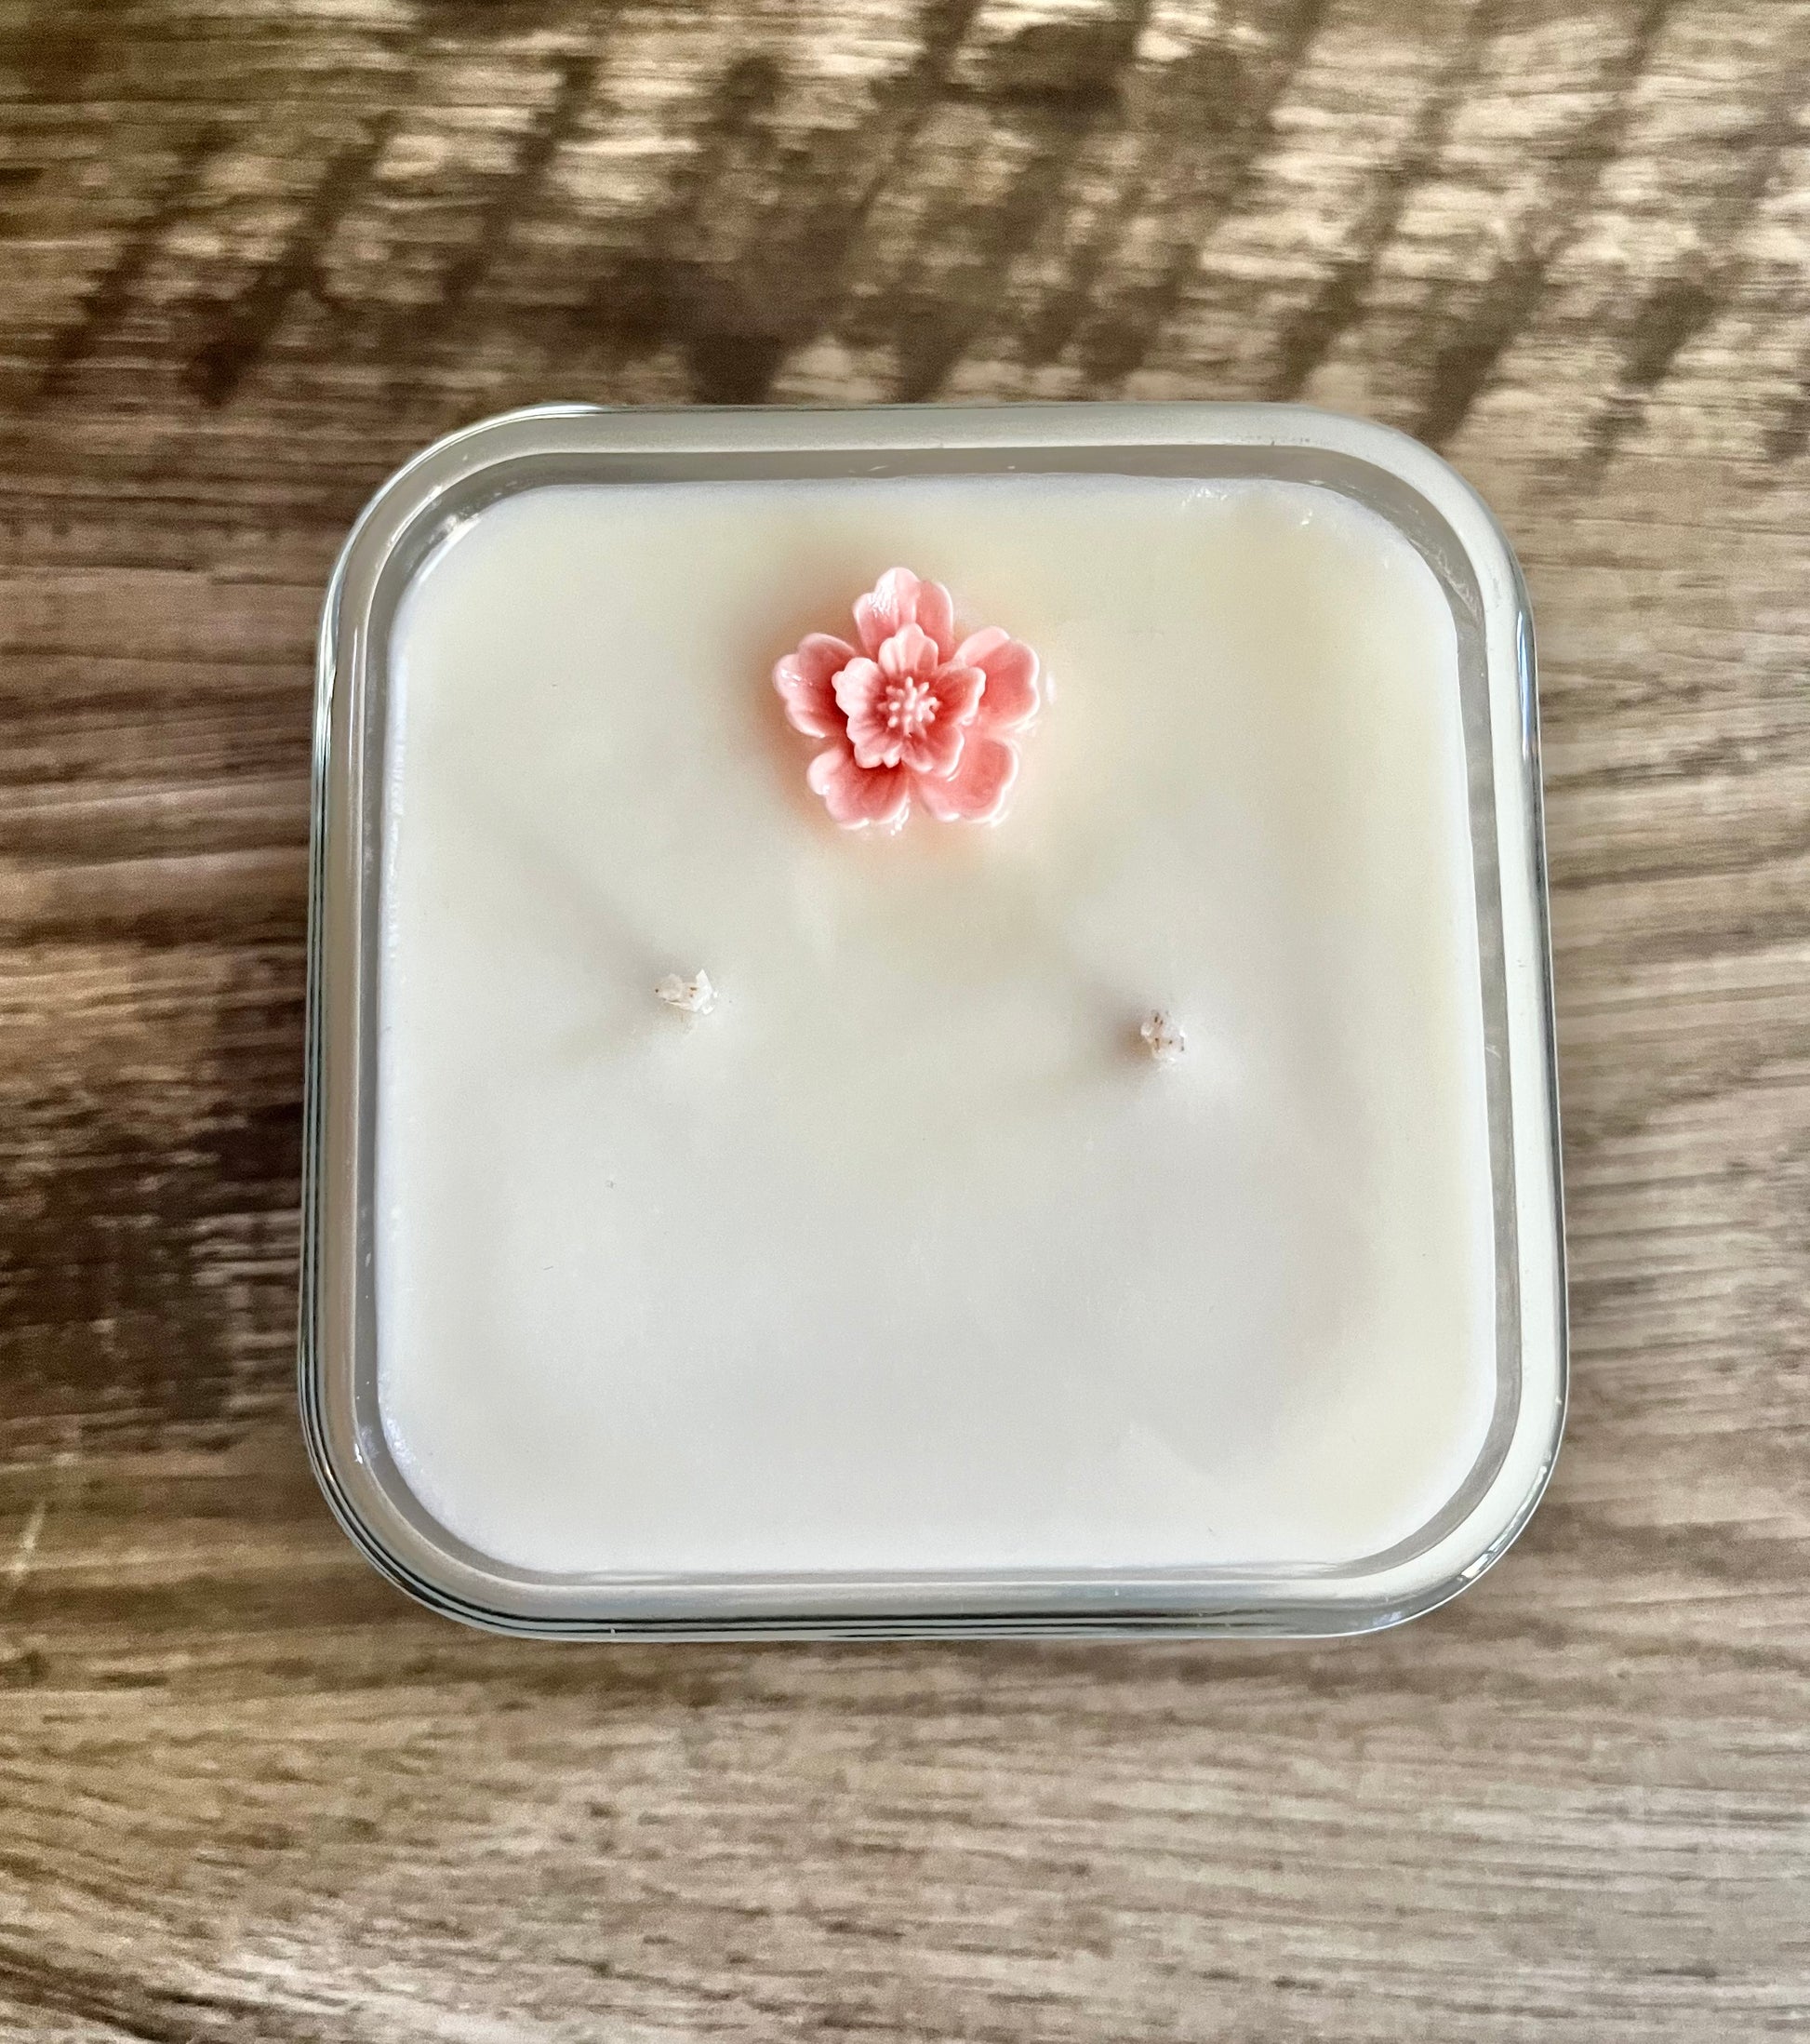 Sakura Glass - Pieces Of Luv Candle Co.